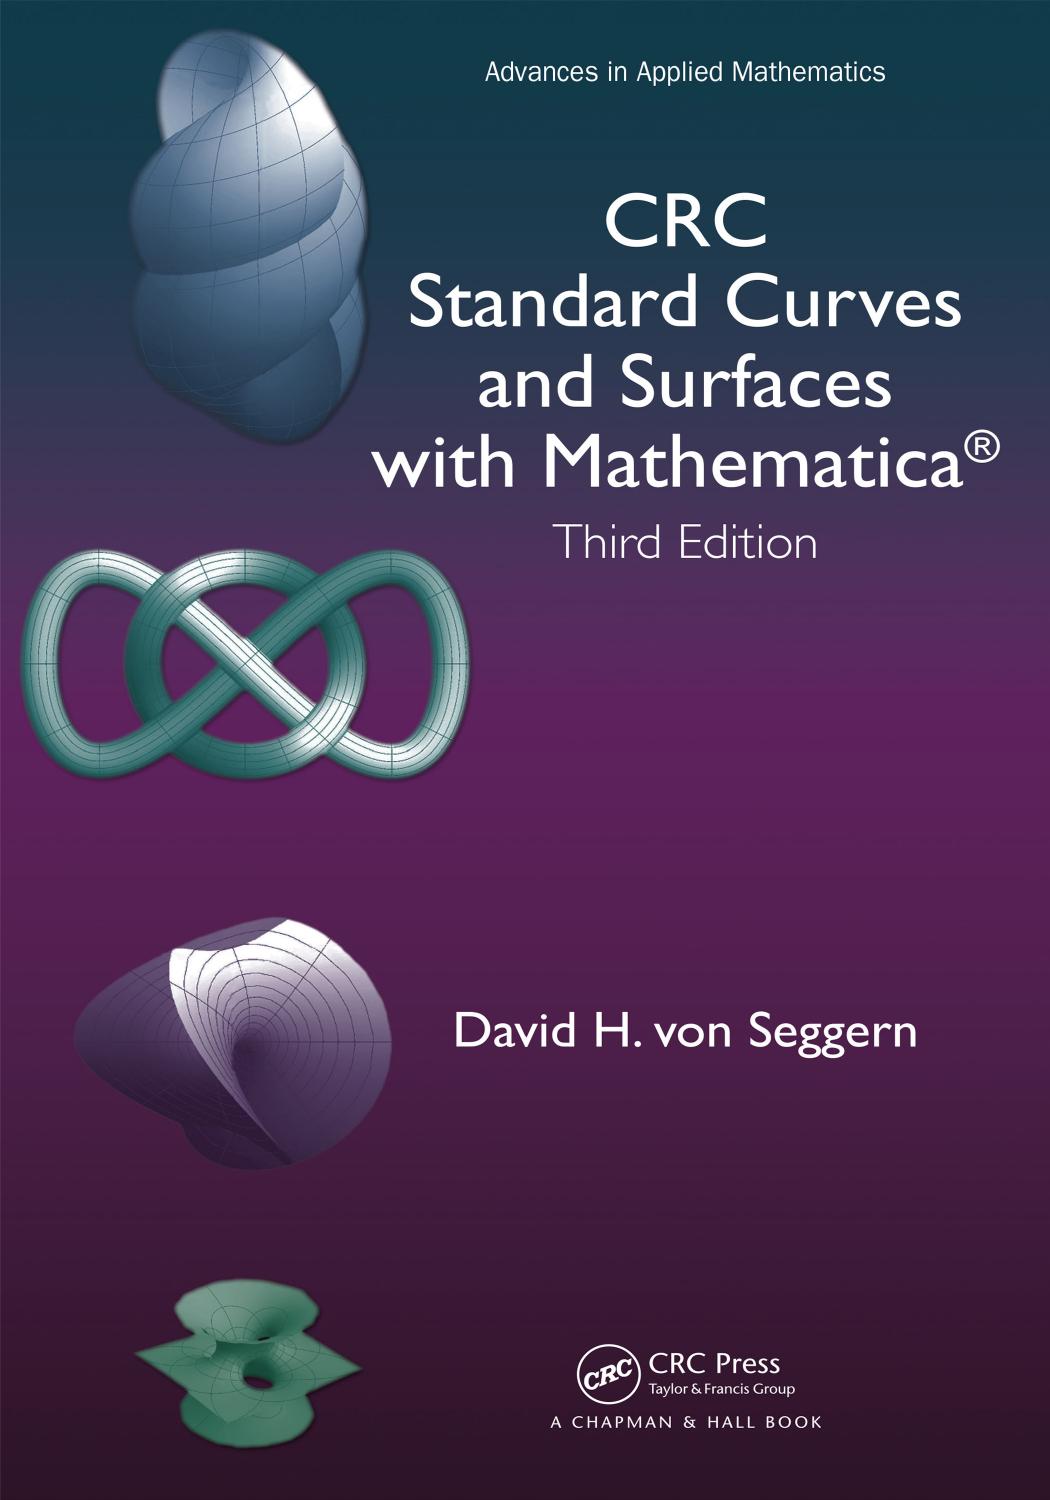 CRC Standard Curves and Surfaces with Mathematica®